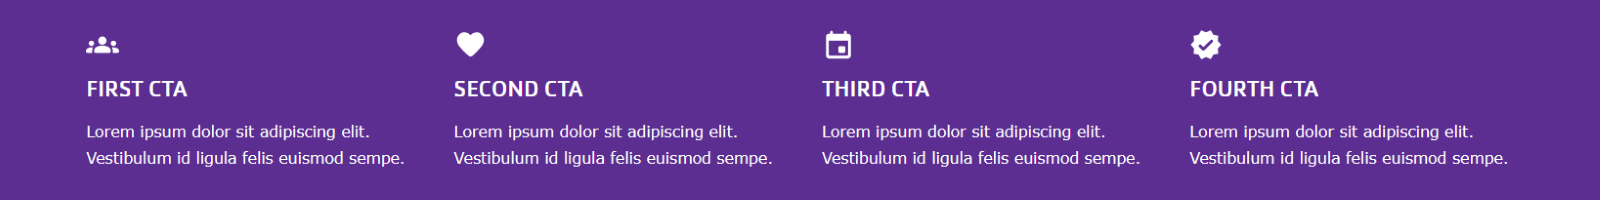 A purple background with white text

Description automatically generated